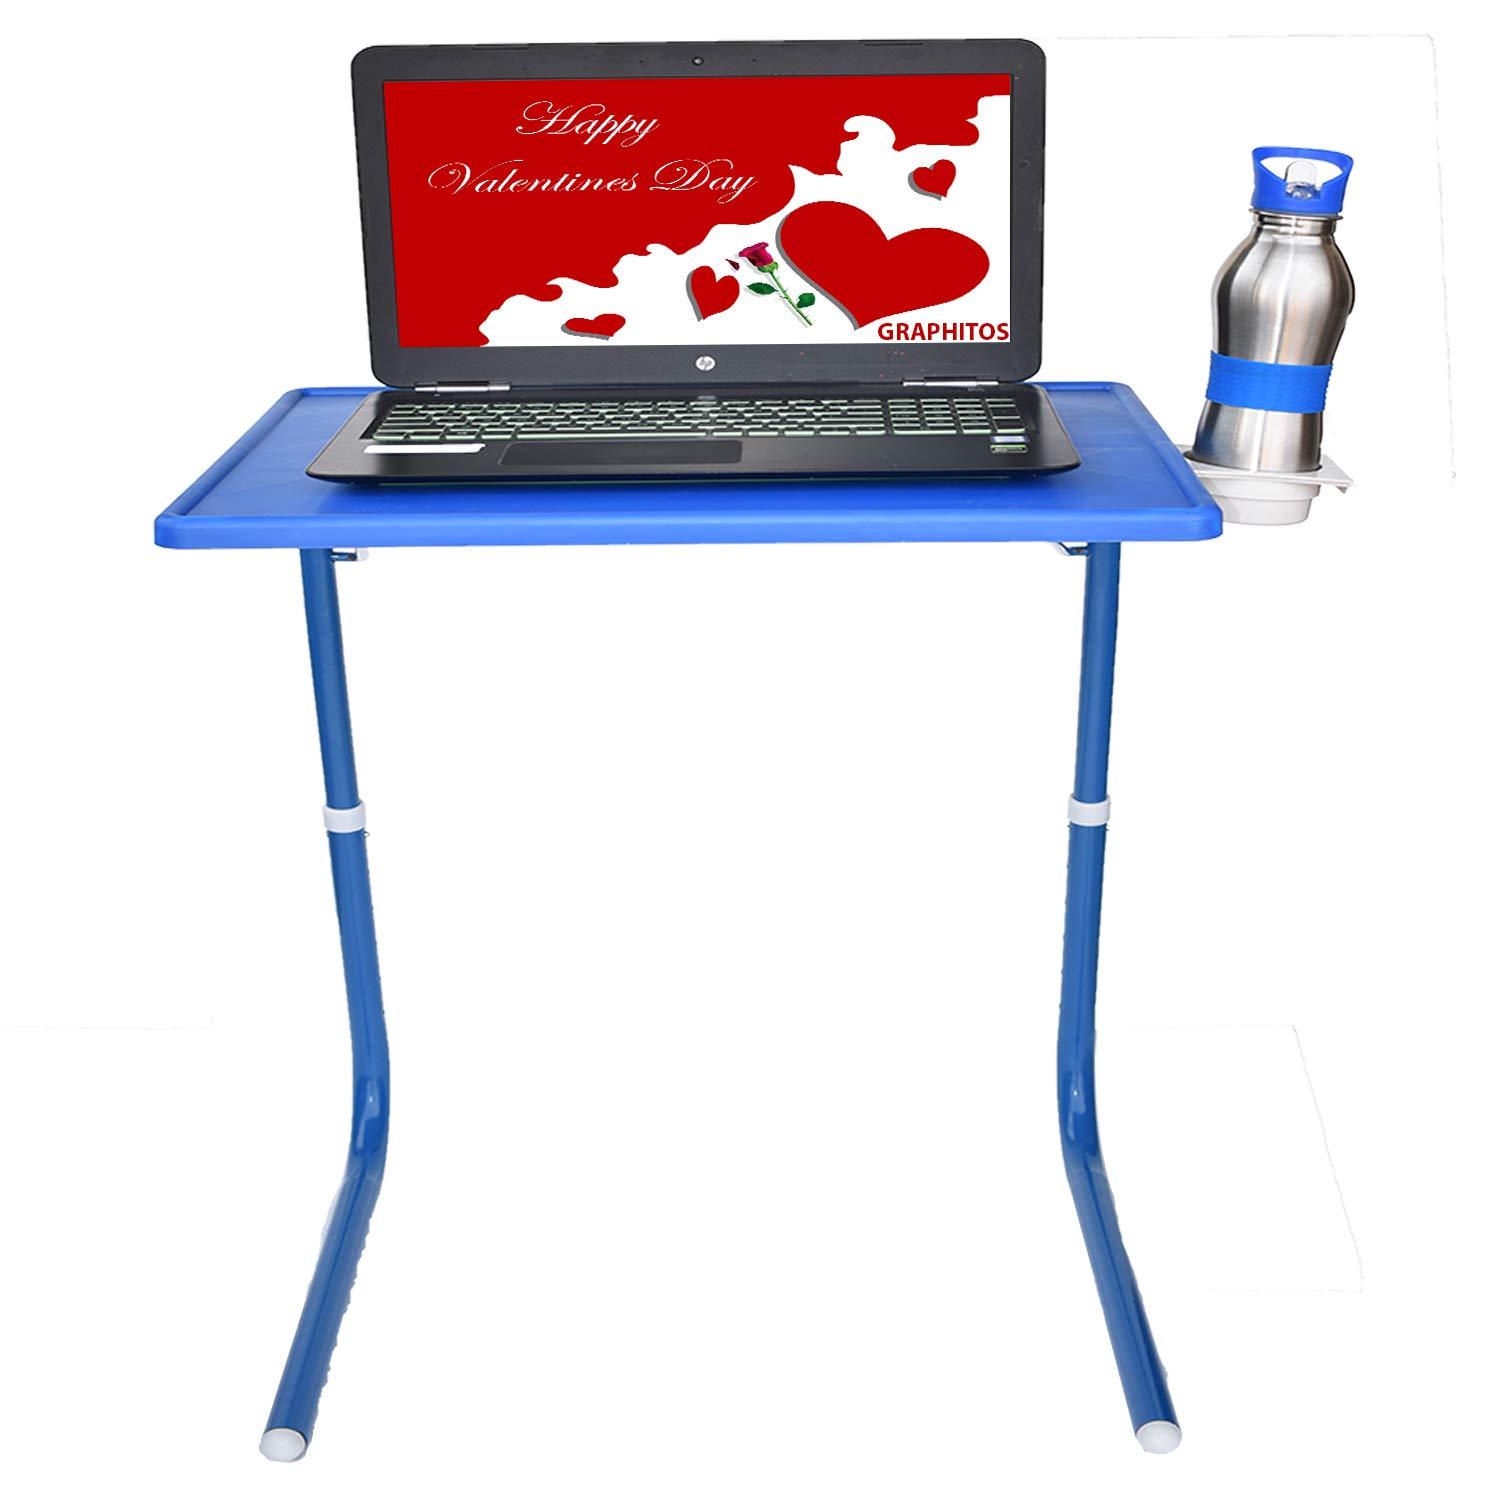 1070 Multi Function Detachable and Foldable Table - SkyShopy